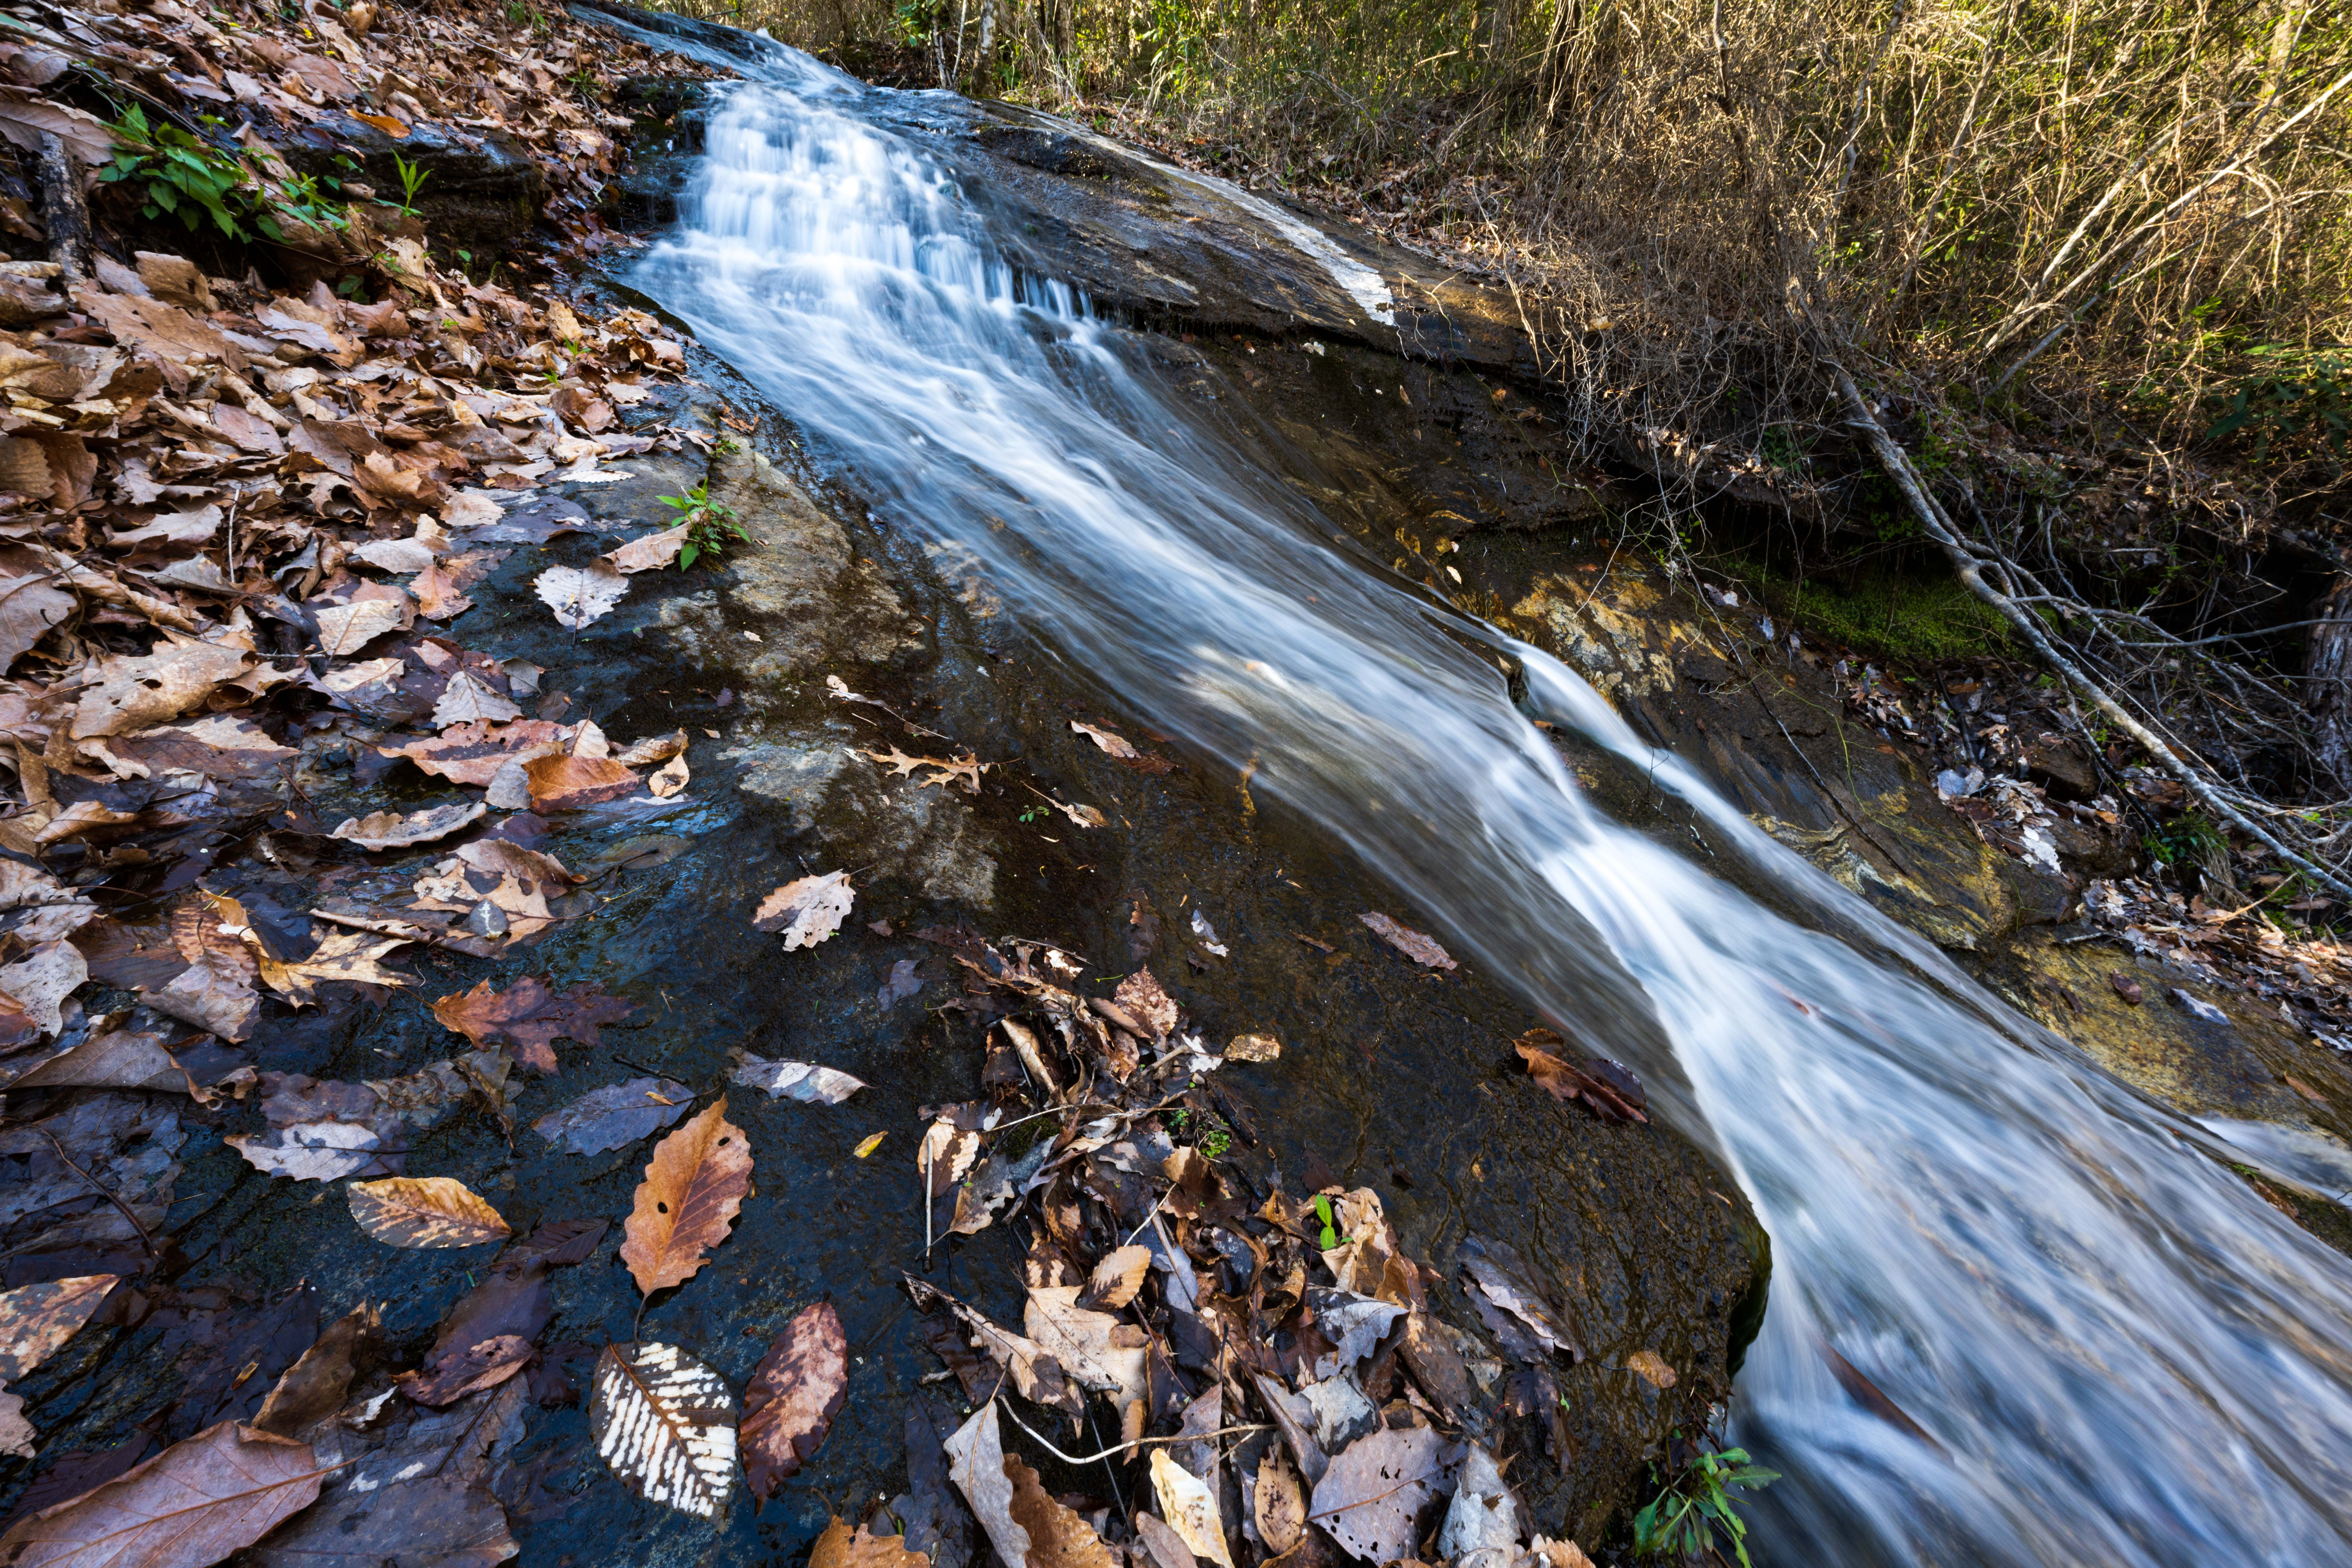 A small waterfall spills down a rockface in the Blue Wall Preserve.